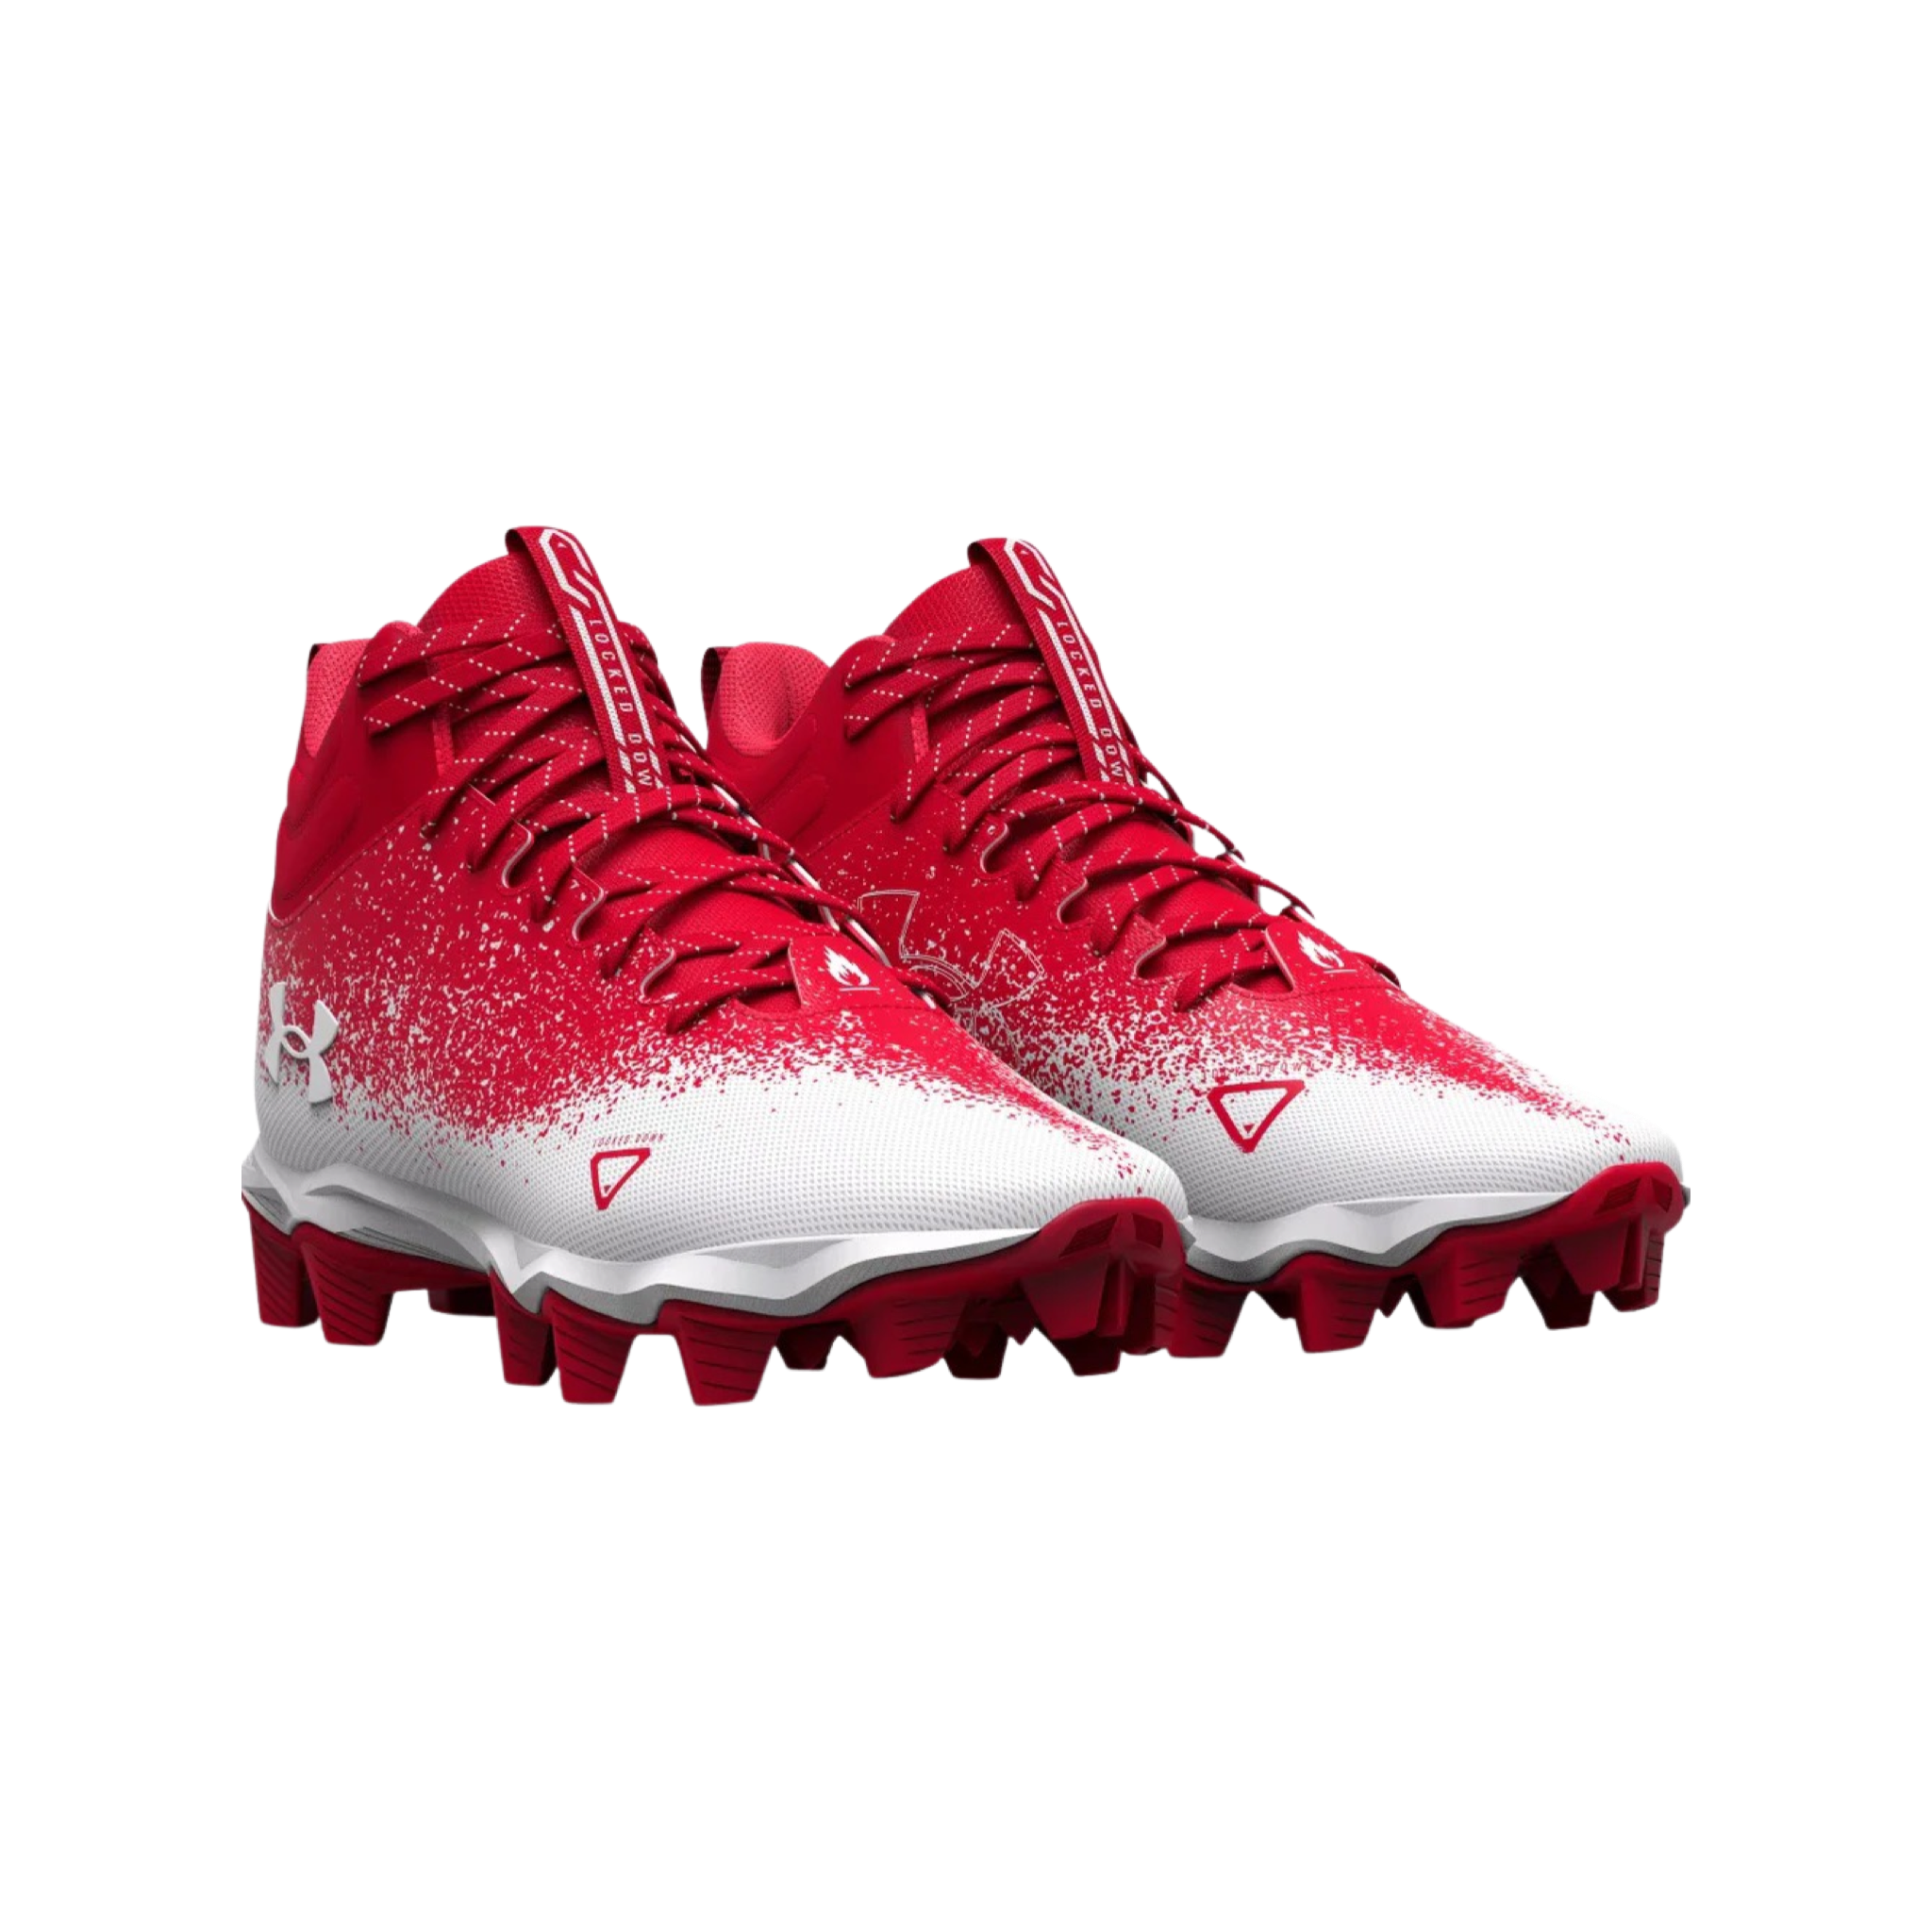 Under Armor Kids' Spotlight Franchise RM Football Cleats - Red- Children's football shoes in red color